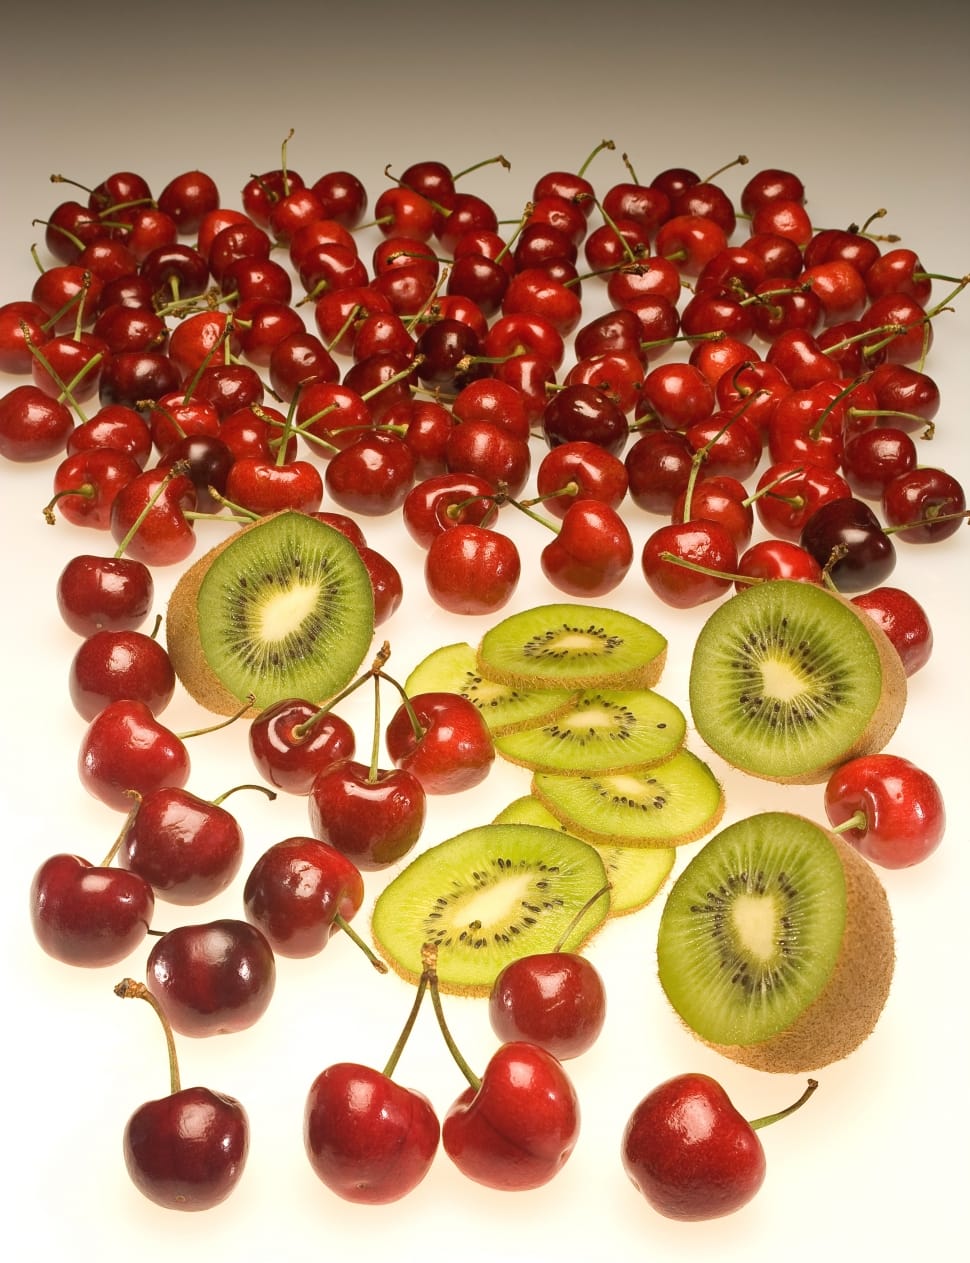 sliced kiwi fruits and red cherries preview